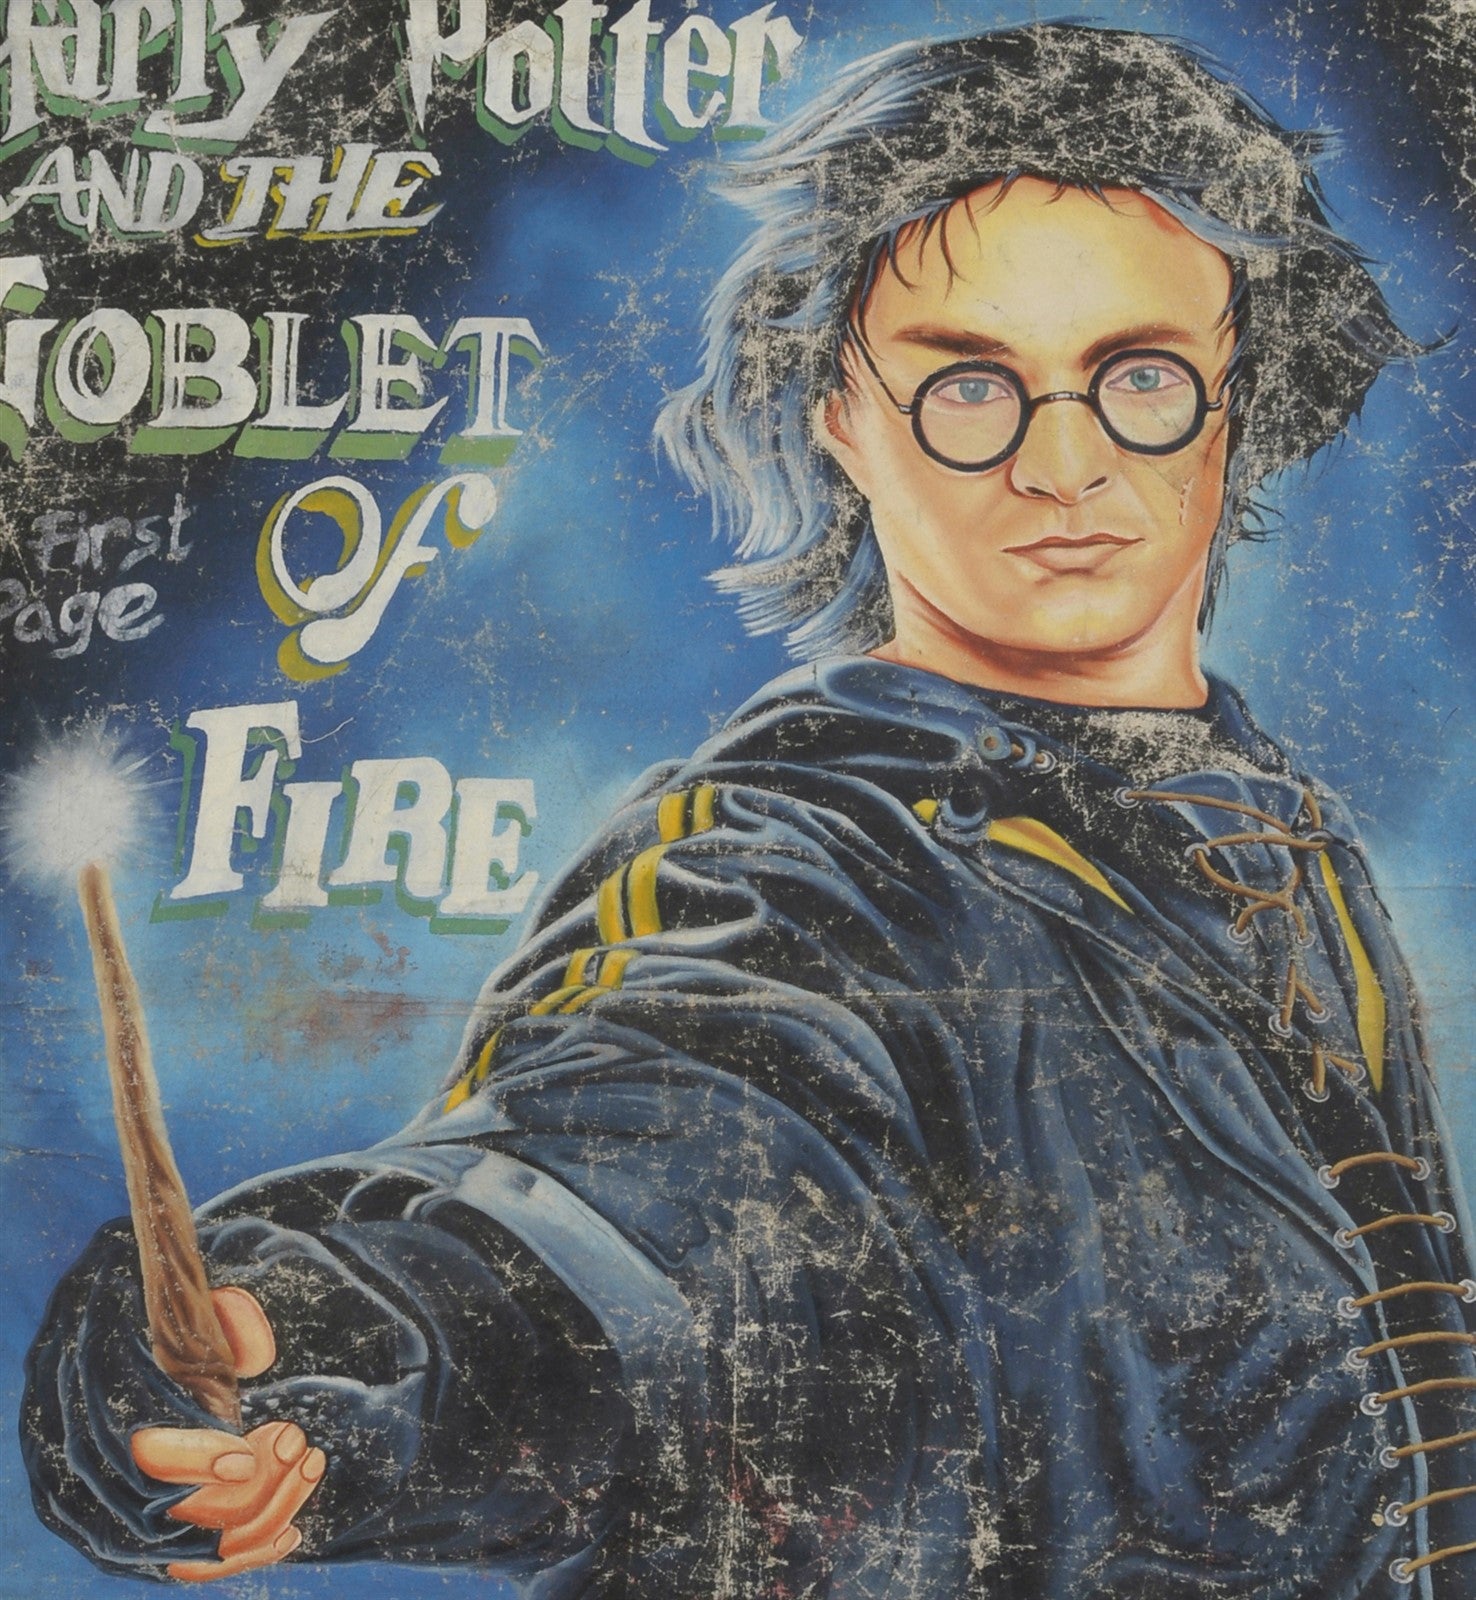 Harry Potter movie poster the Goblet of Fire Ghana movie poster